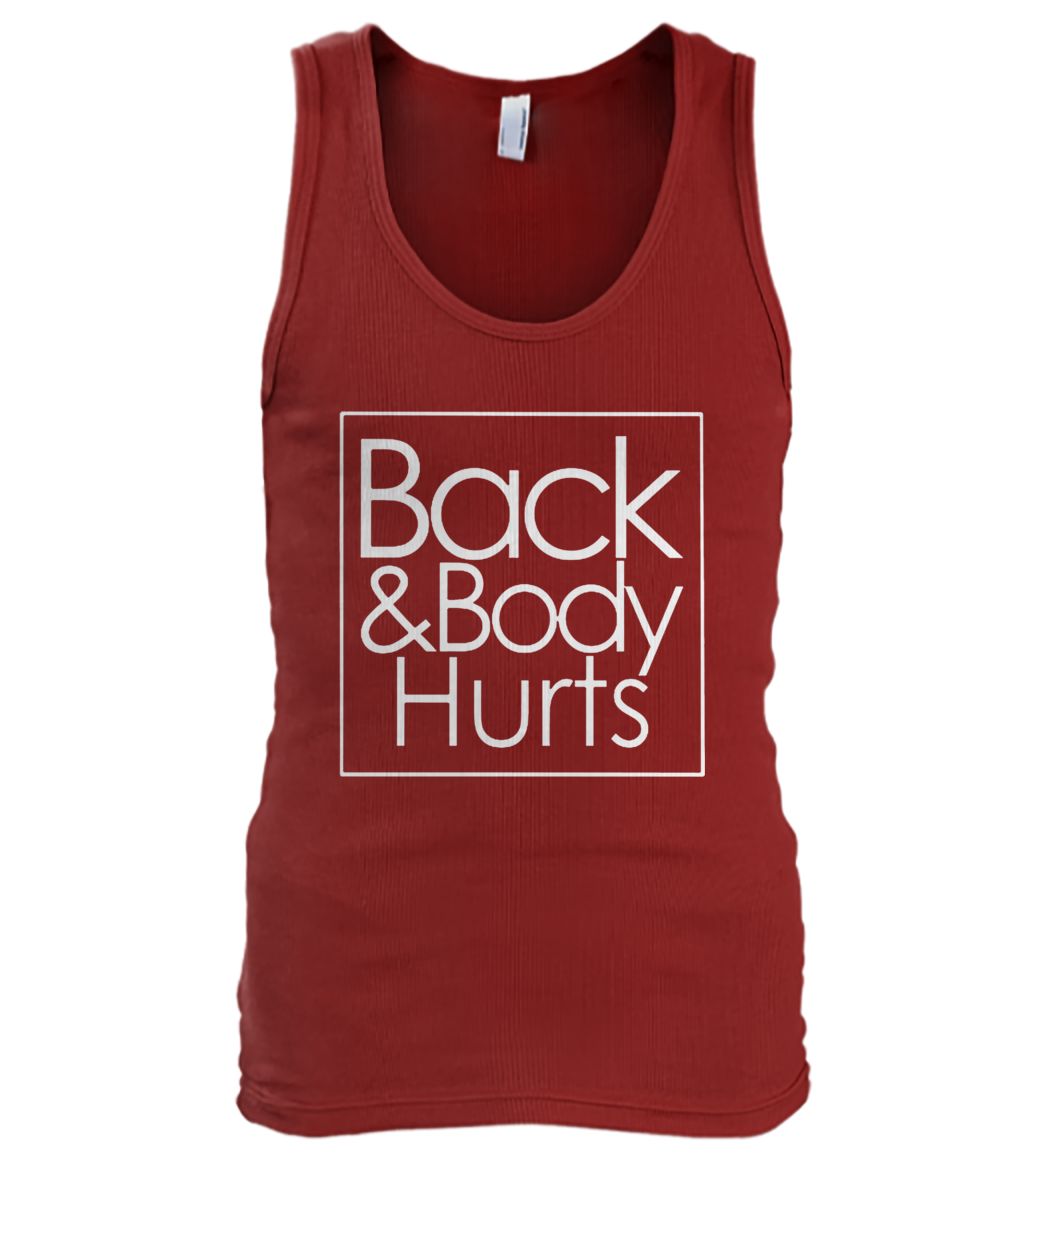 My back and body hurts men's tank top